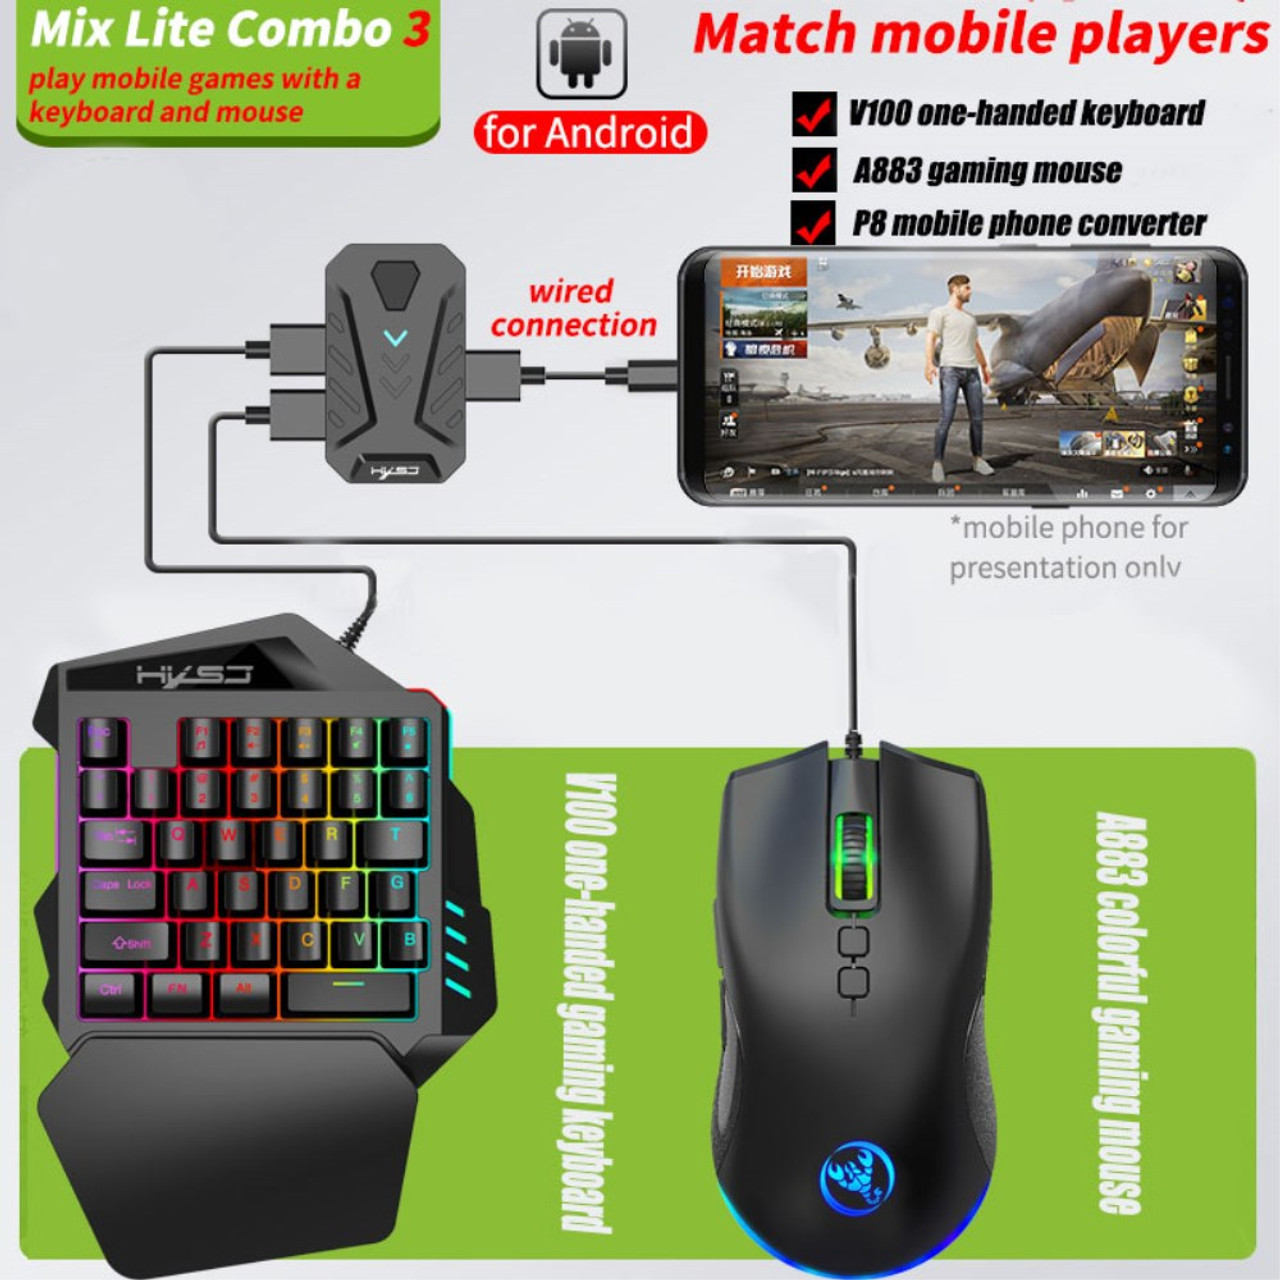 Usb Wired 35keys One-handed RGB Gaming Keyboard and Mouse 6400 Dpi